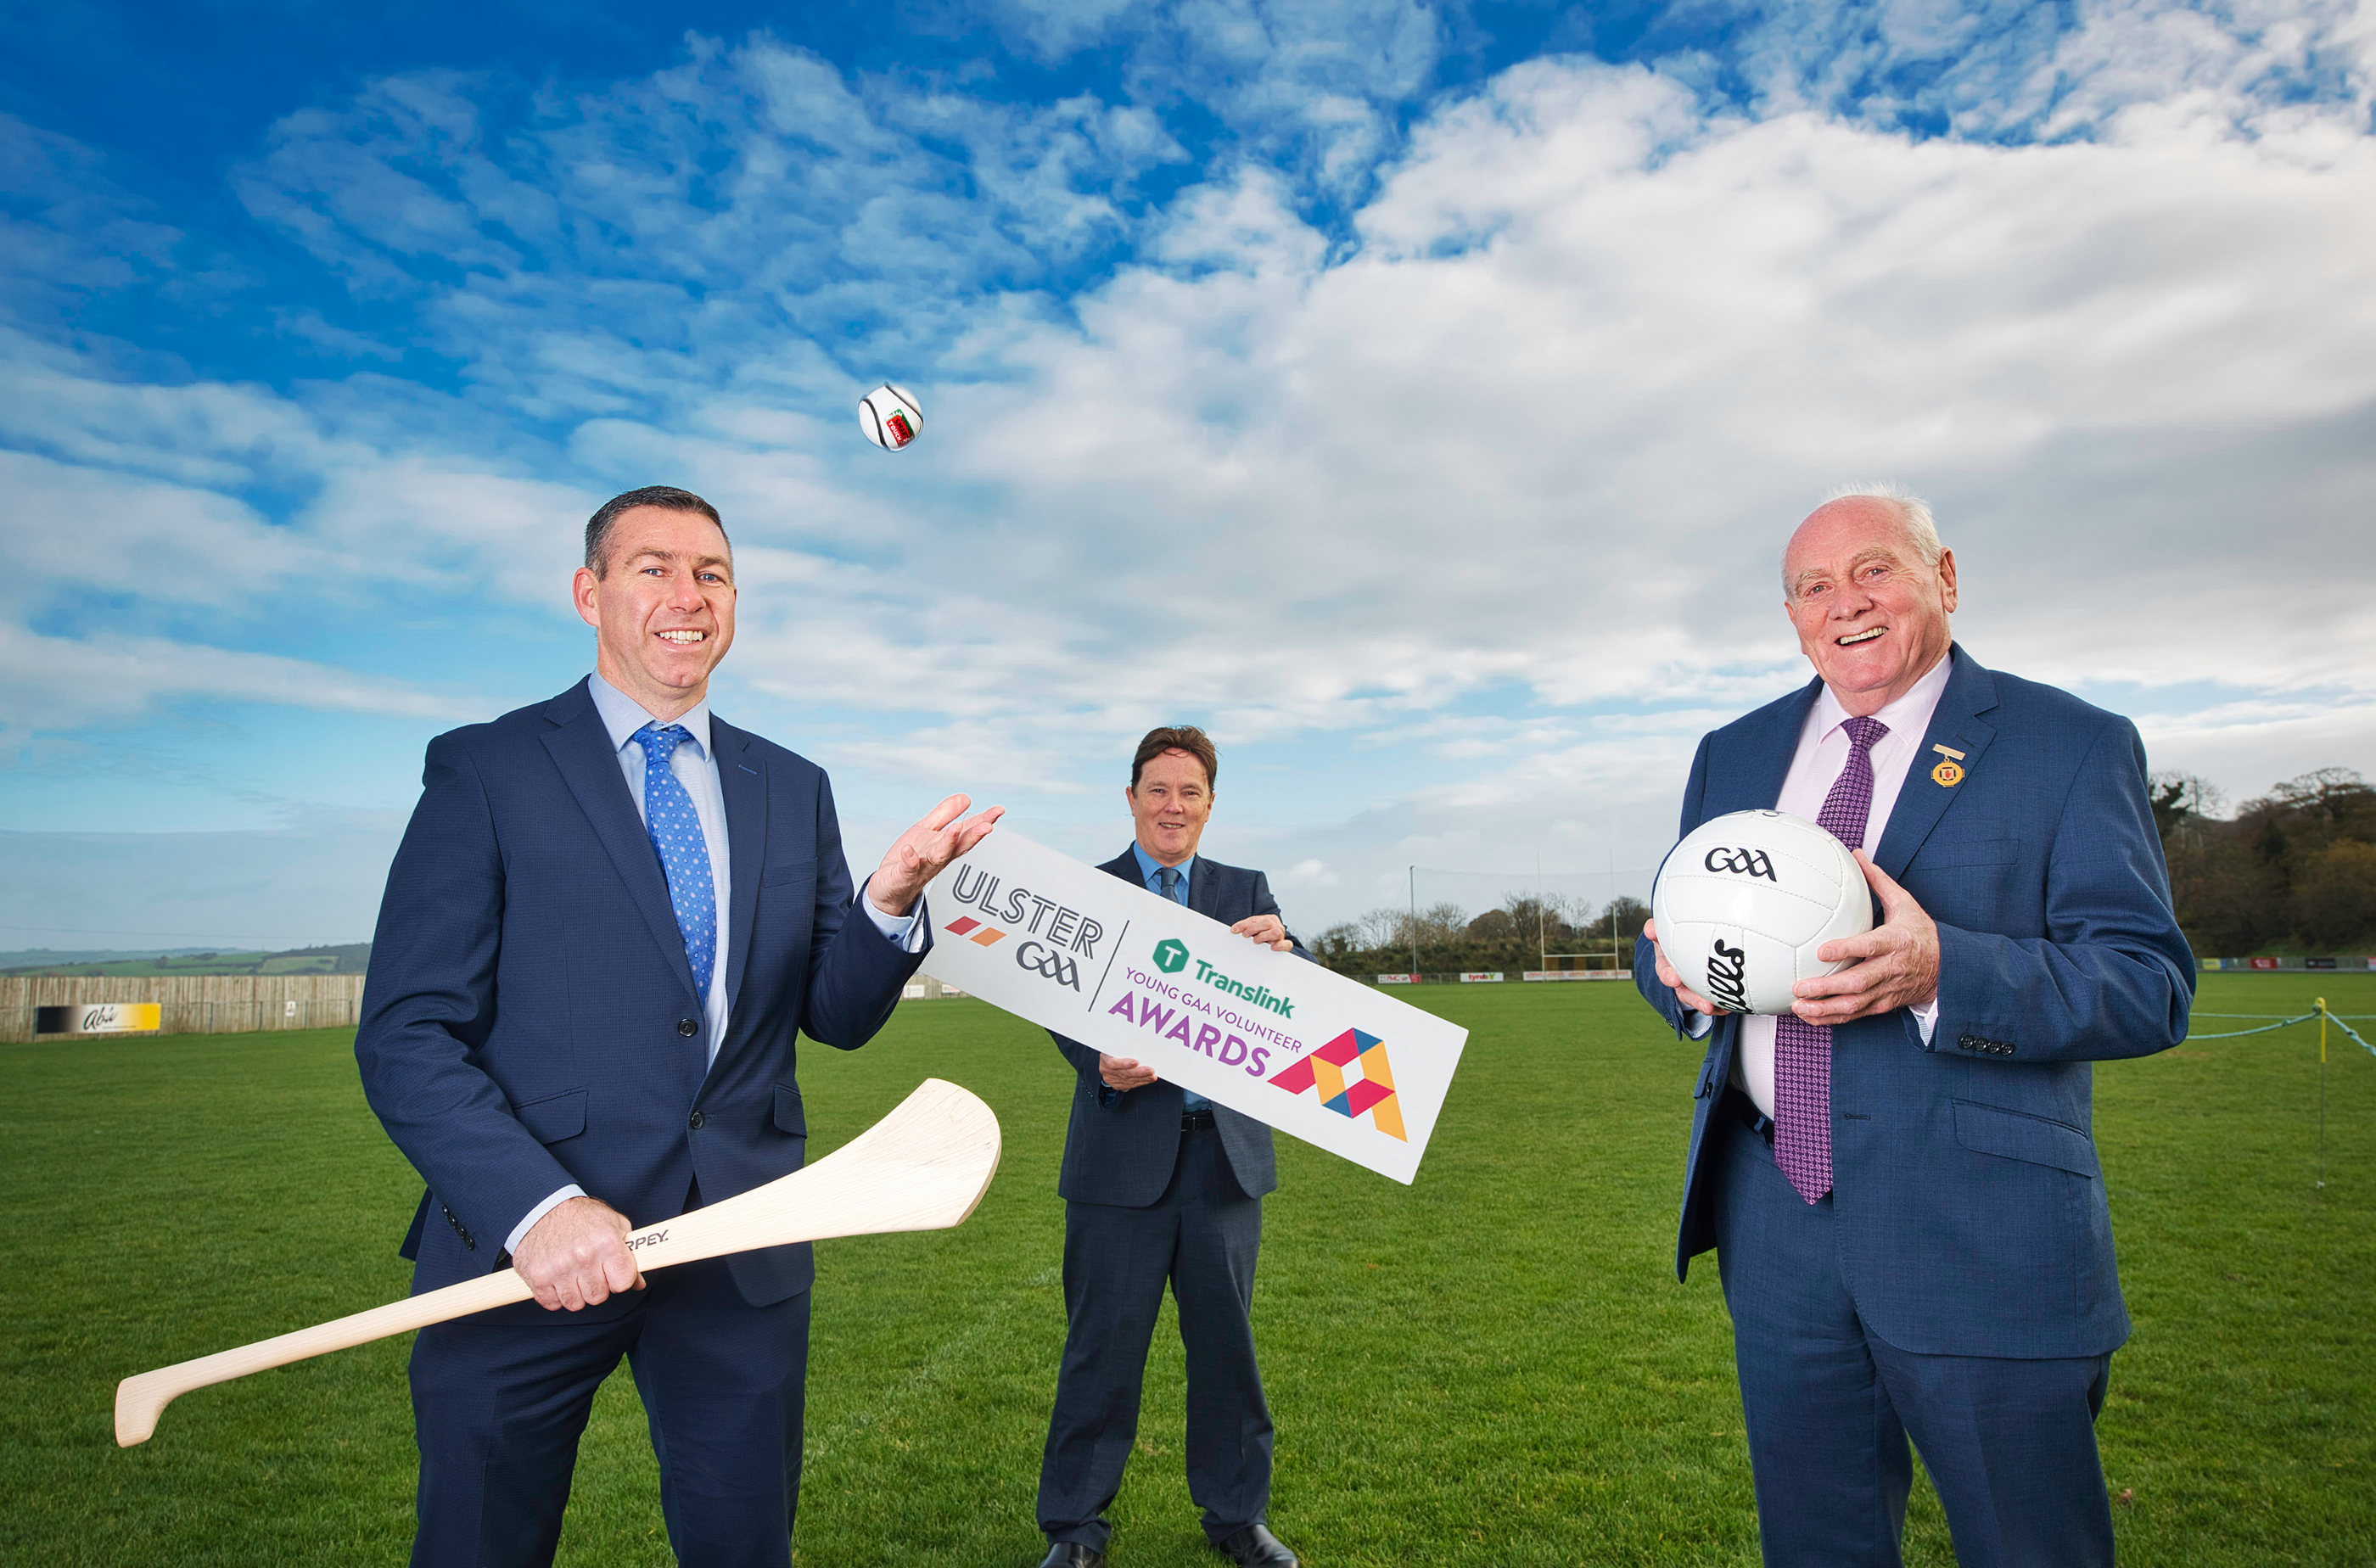 Ulster GAA and Translink launch search for outstanding young GAA volunteers